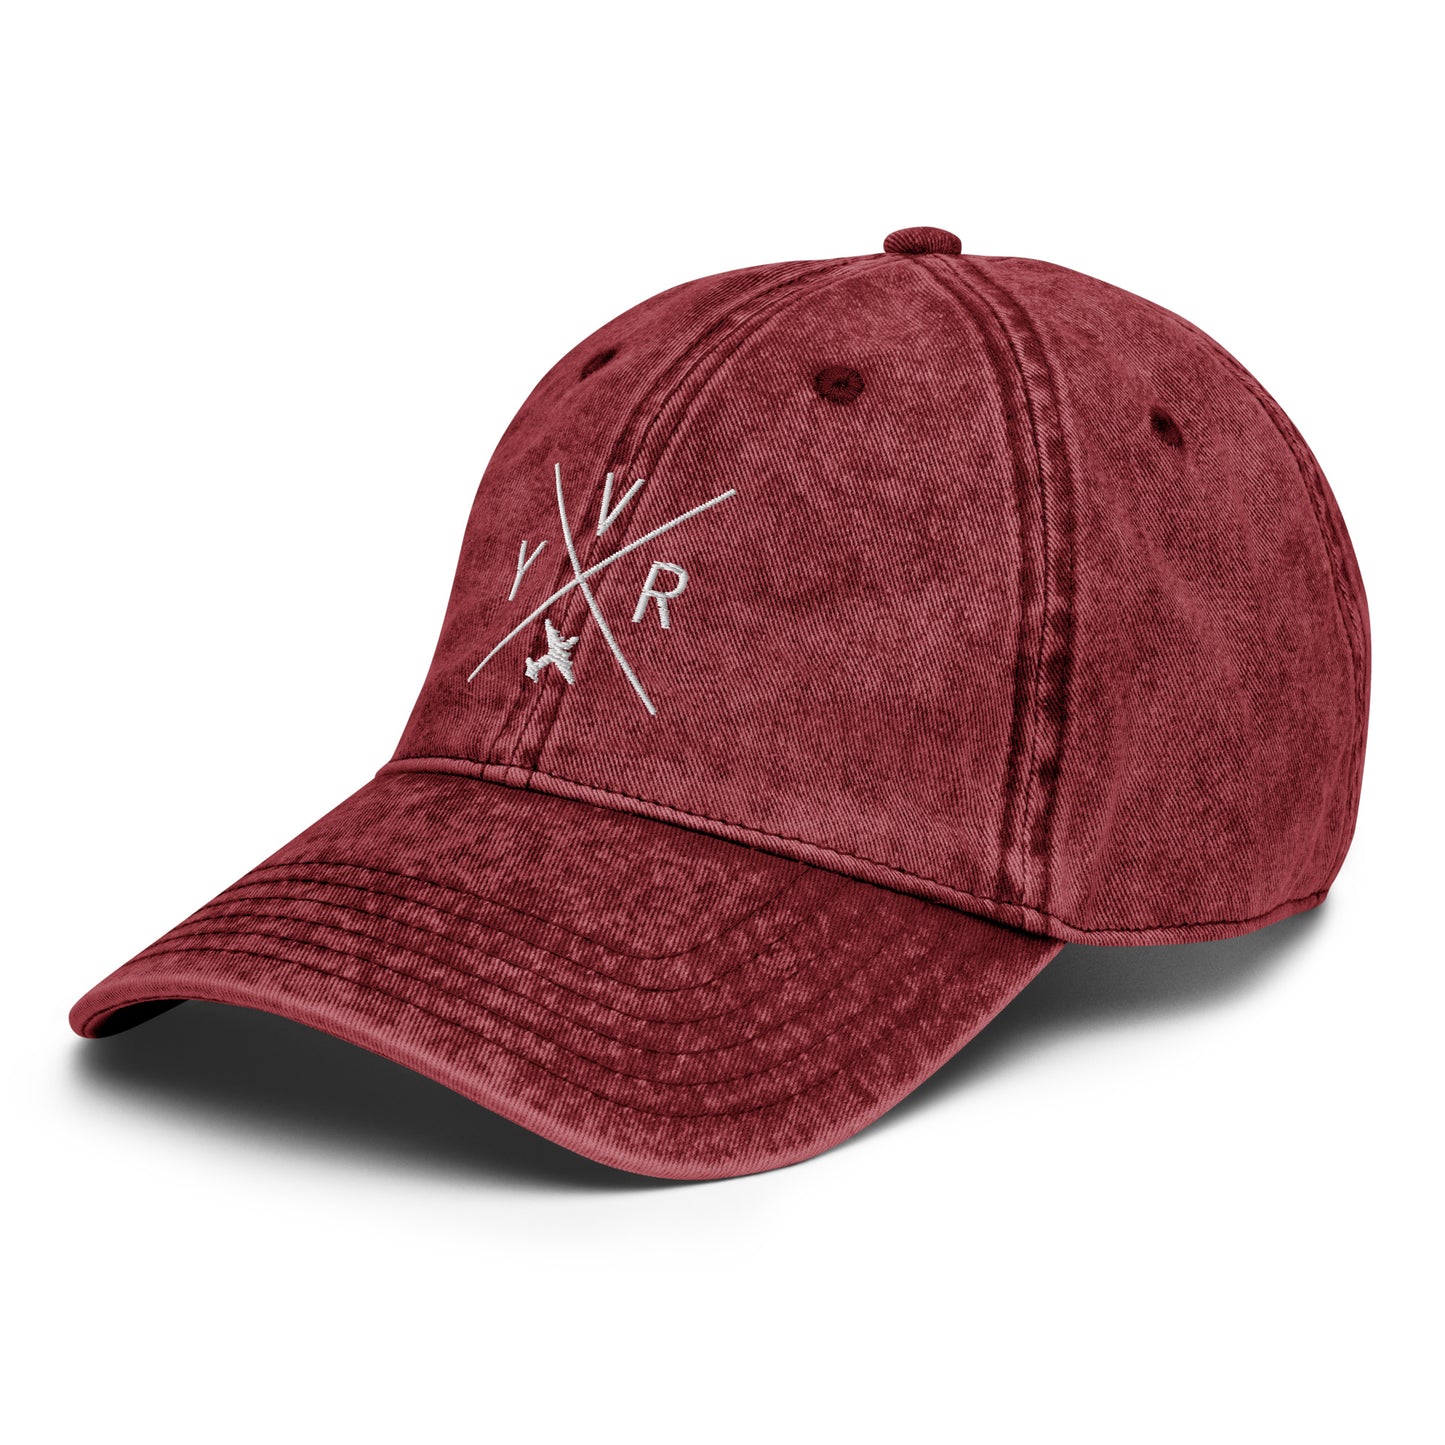 Crossed-X Cotton Twill Cap - White • YVR Vancouver • YHM Designs - Image 23